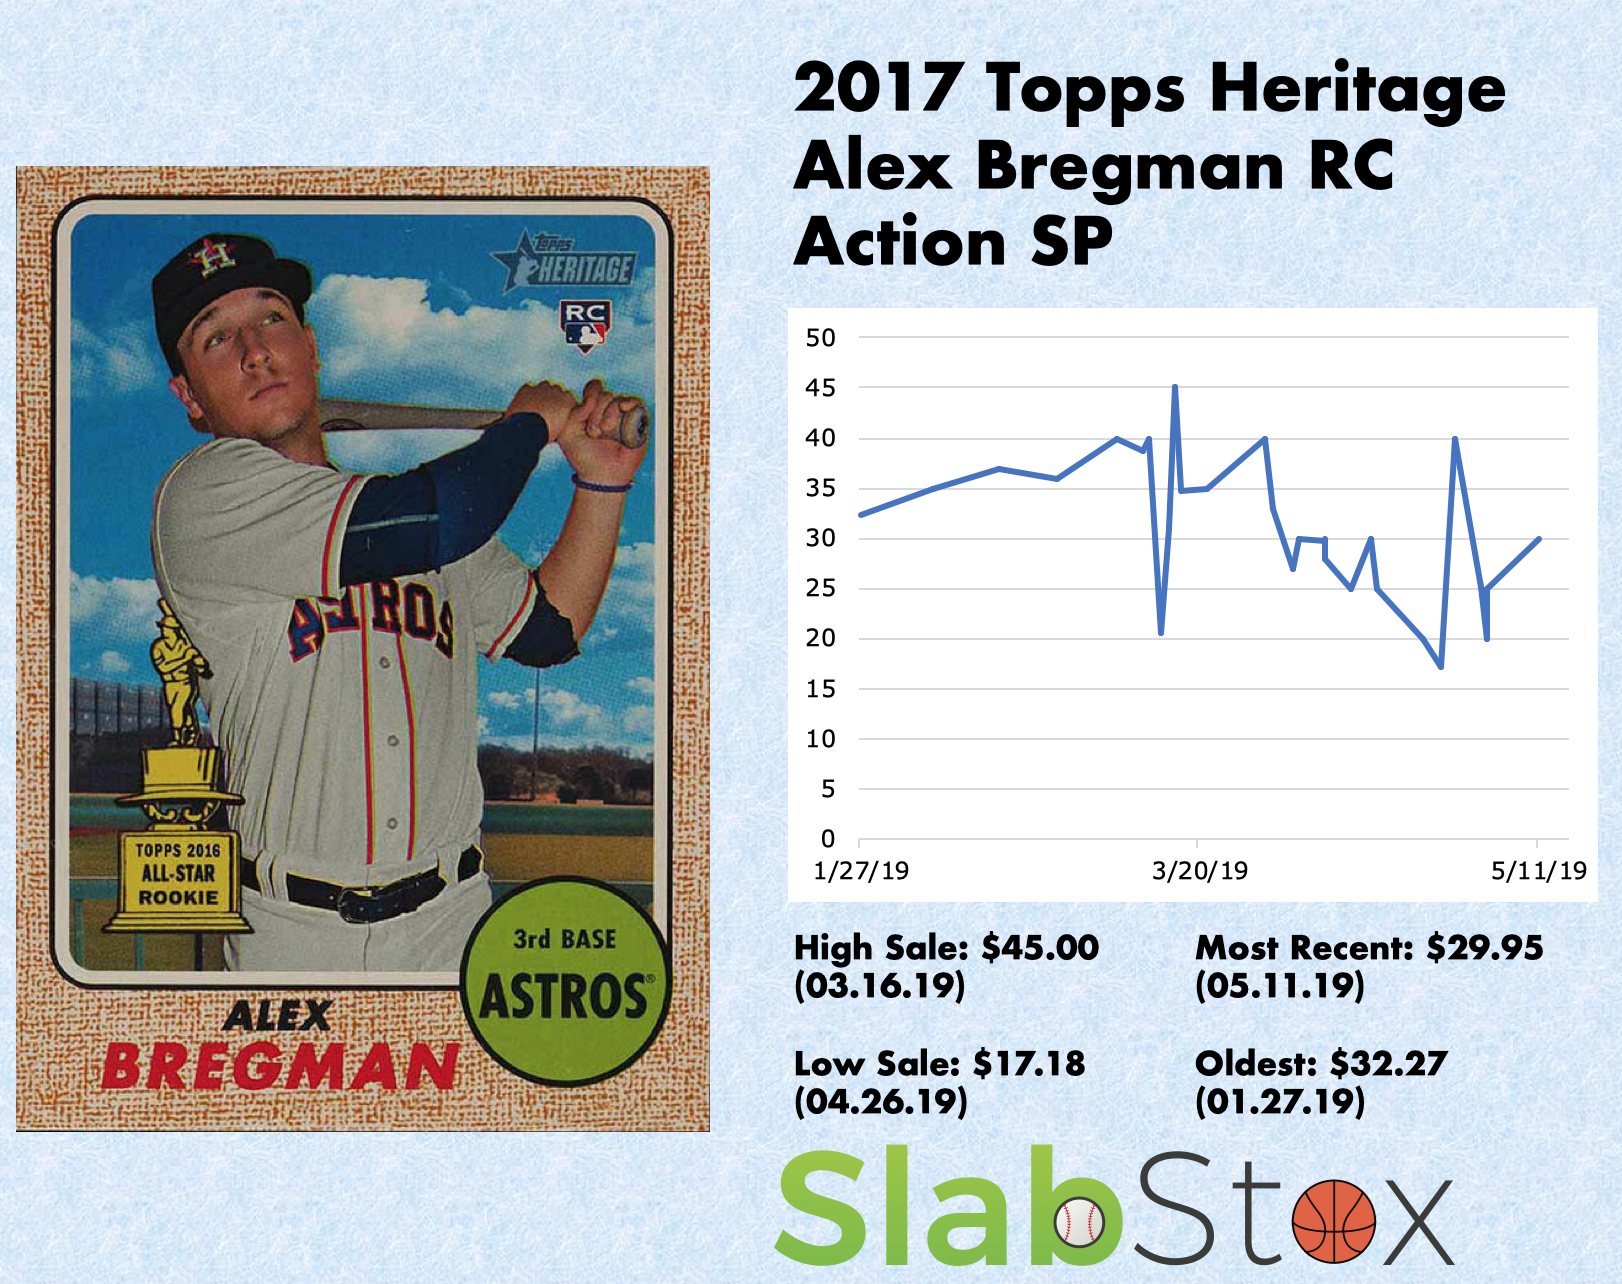 SlabStox infographic for 2017 Topps Heritage Alex Bregman RC Action SP sports trading card